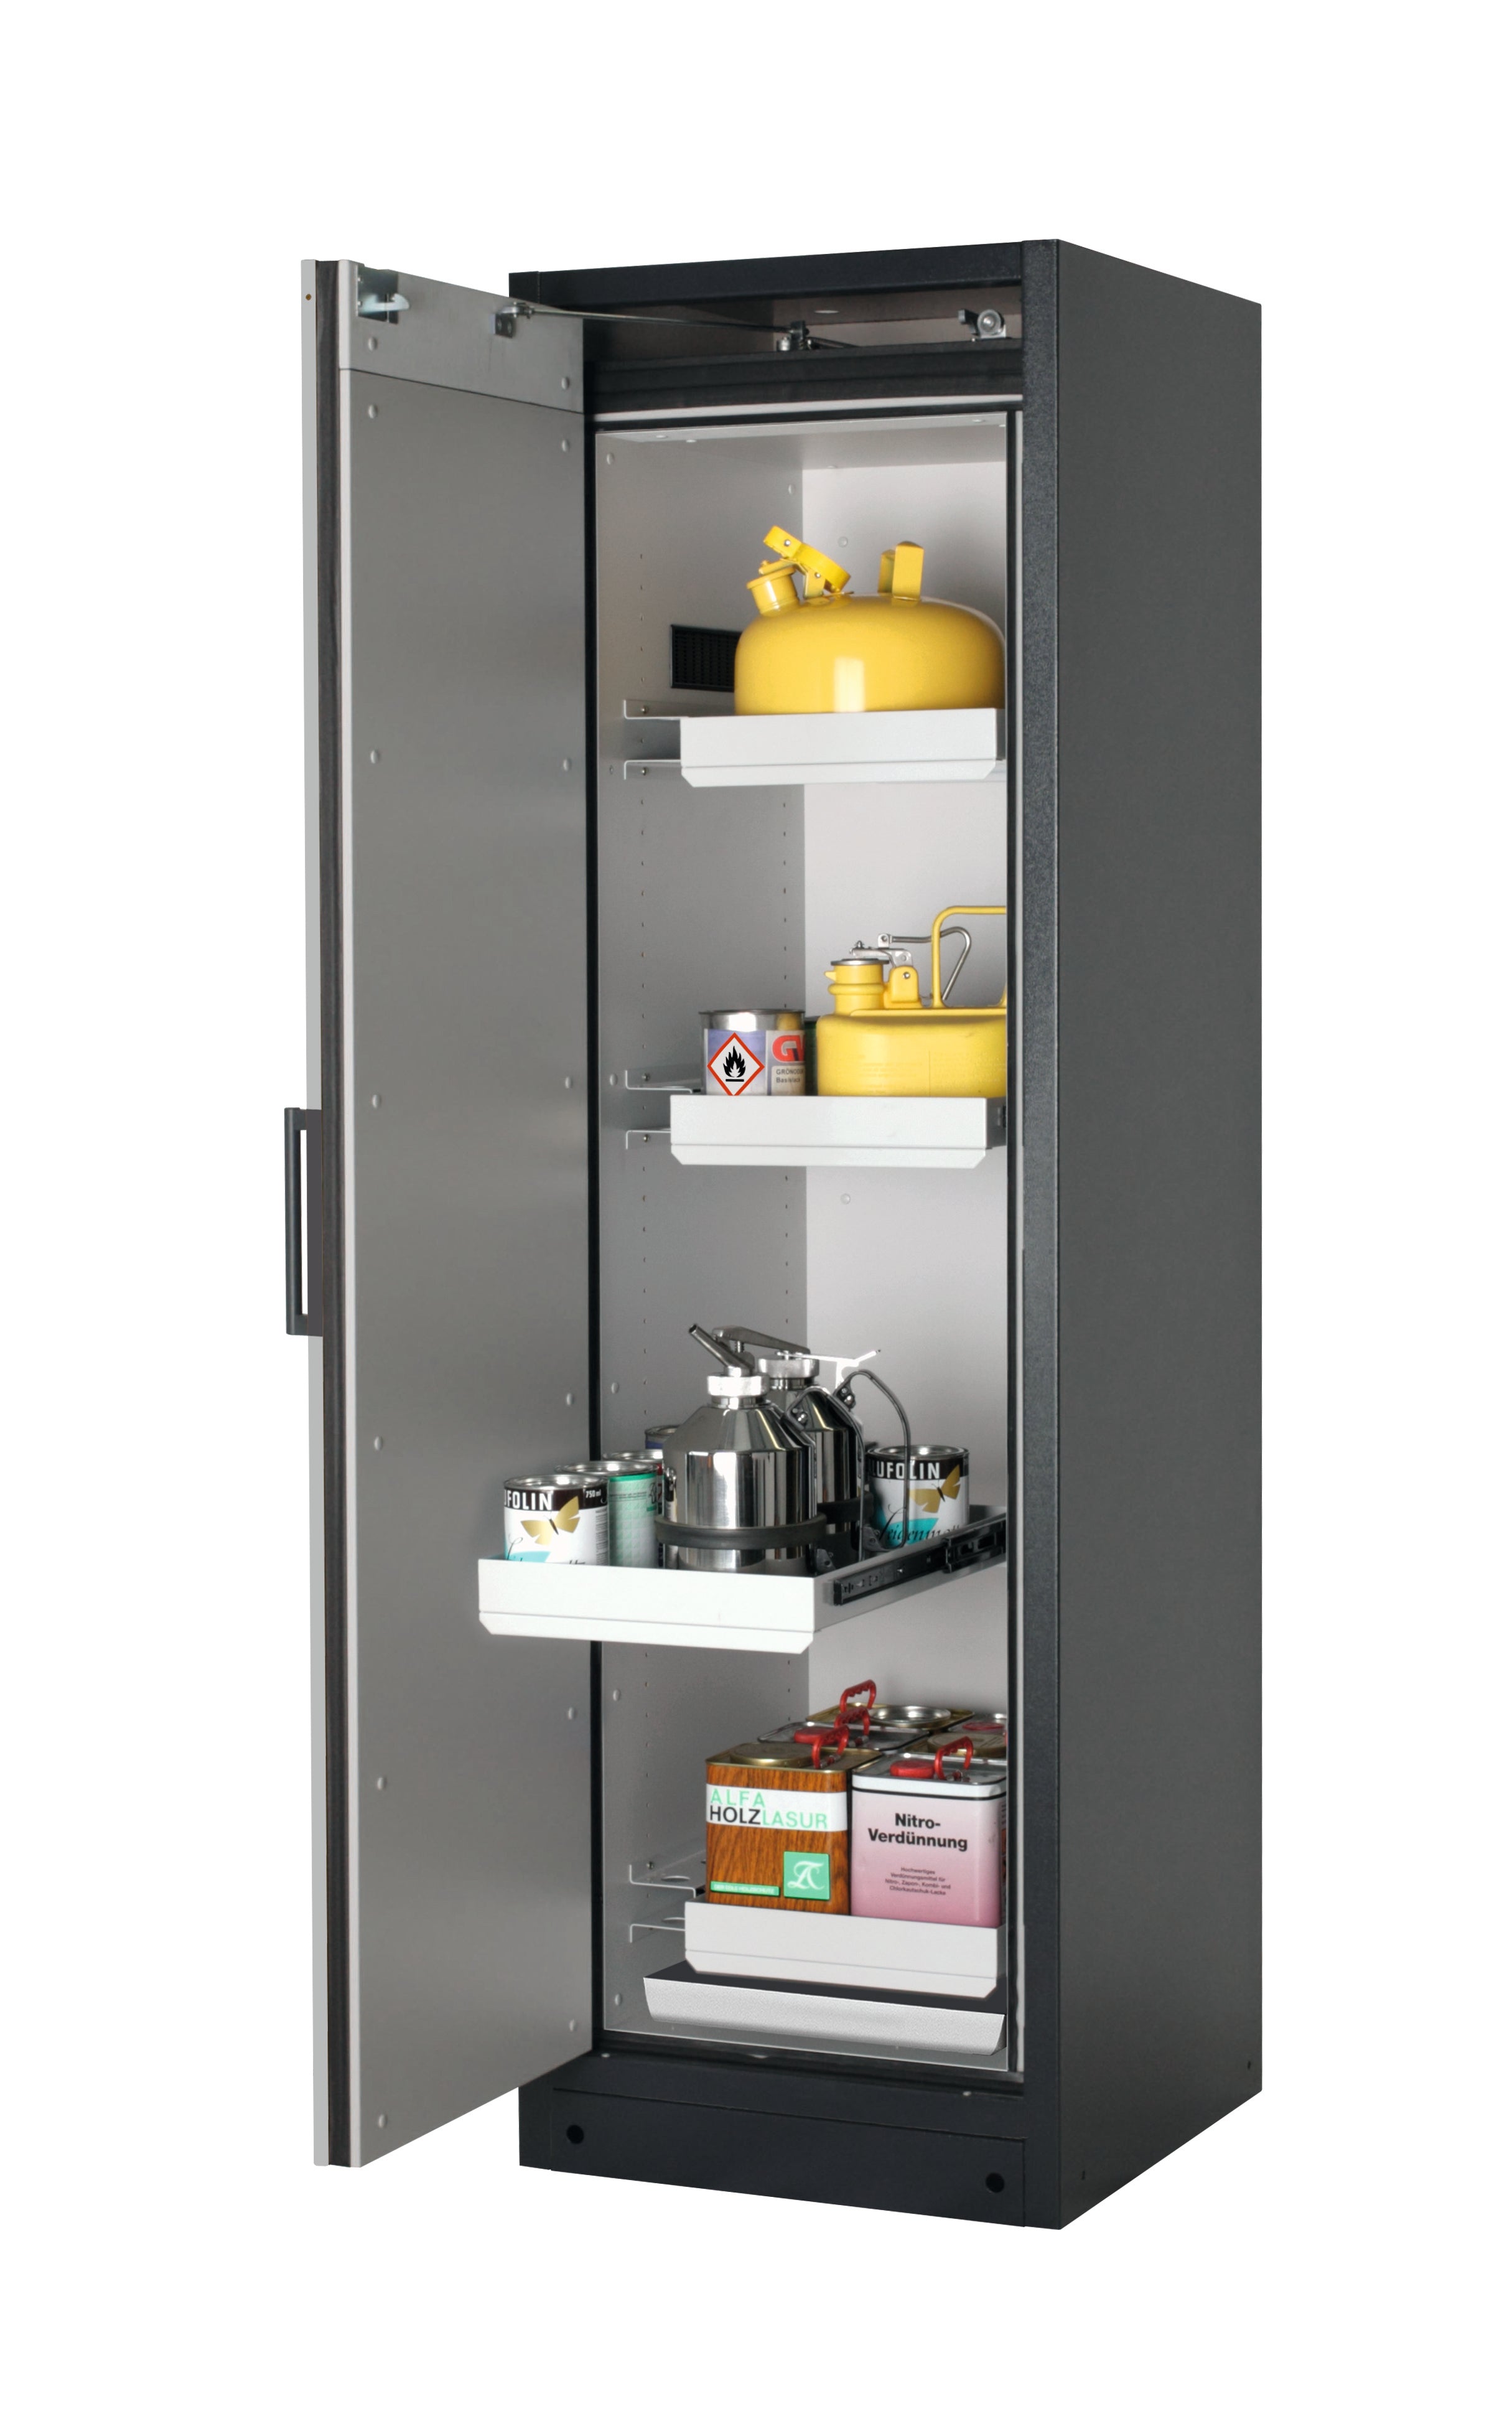 Type 90 safety storage cabinet Q-CLASSIC-90 model Q90.195.060 in asecos silver with 4x drawer (standard) (sheet steel),